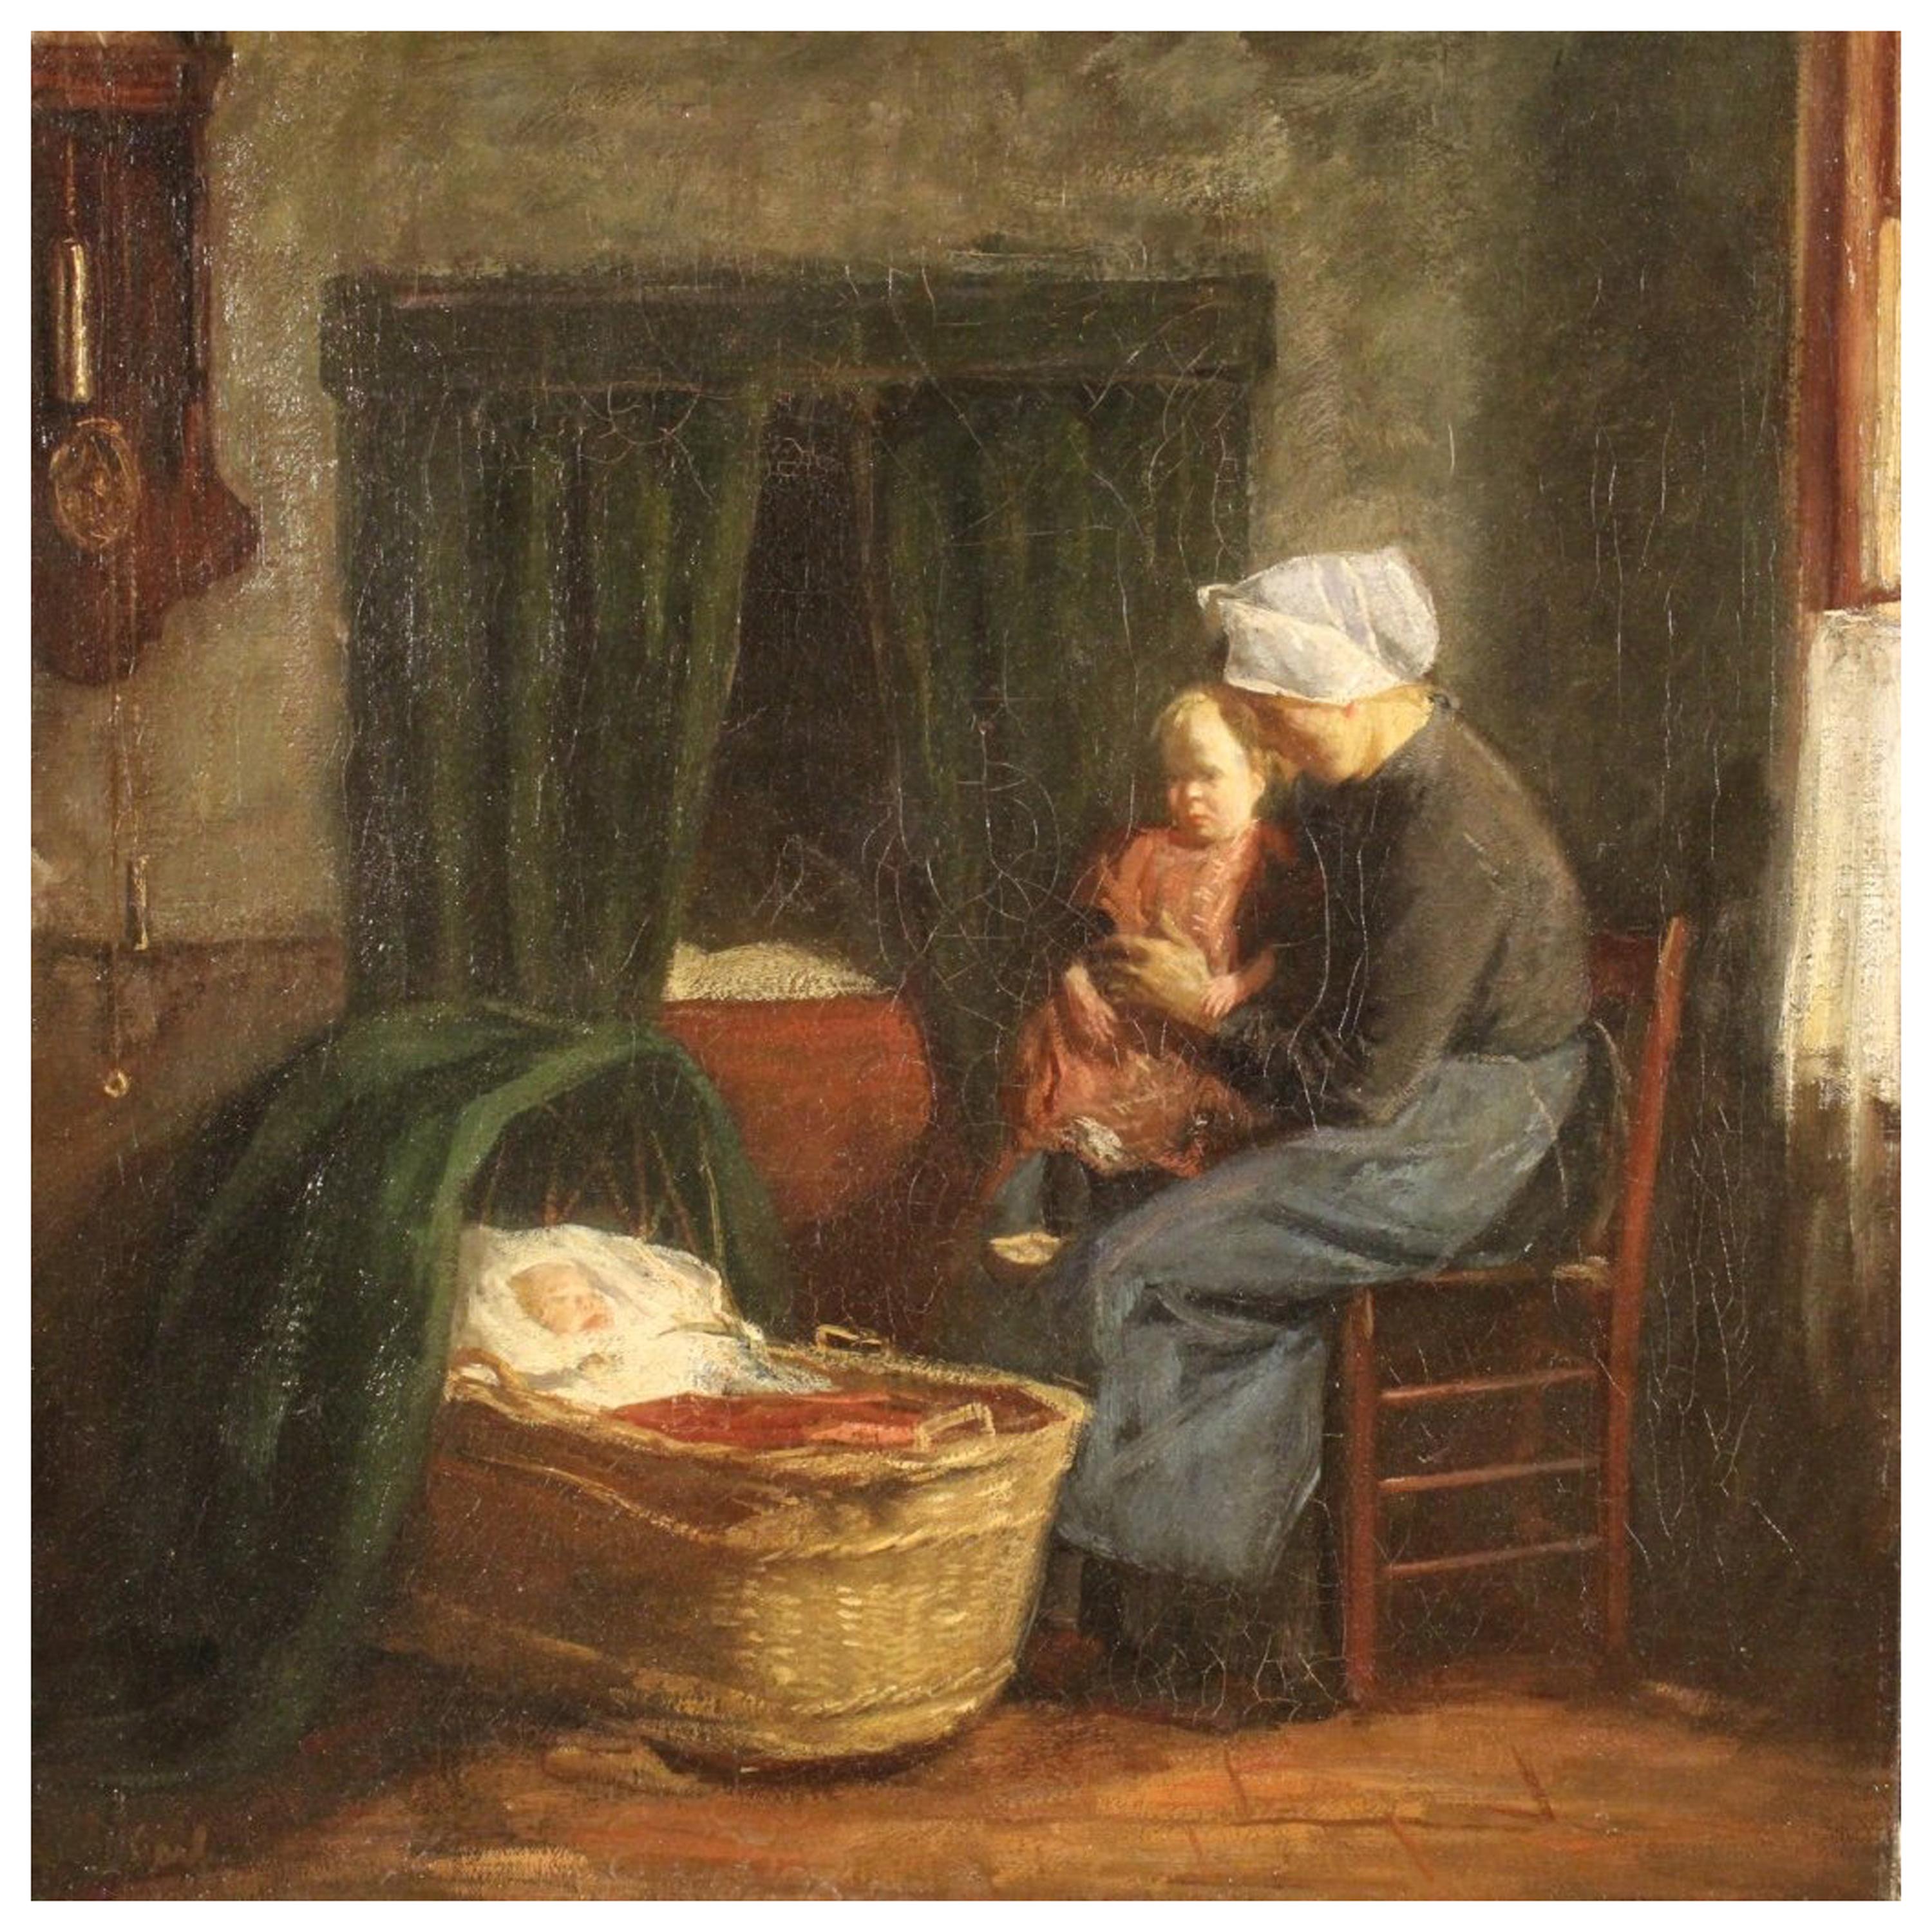 Dutch Painting Interior Scene with Children Oil on Canvas from 19th Century